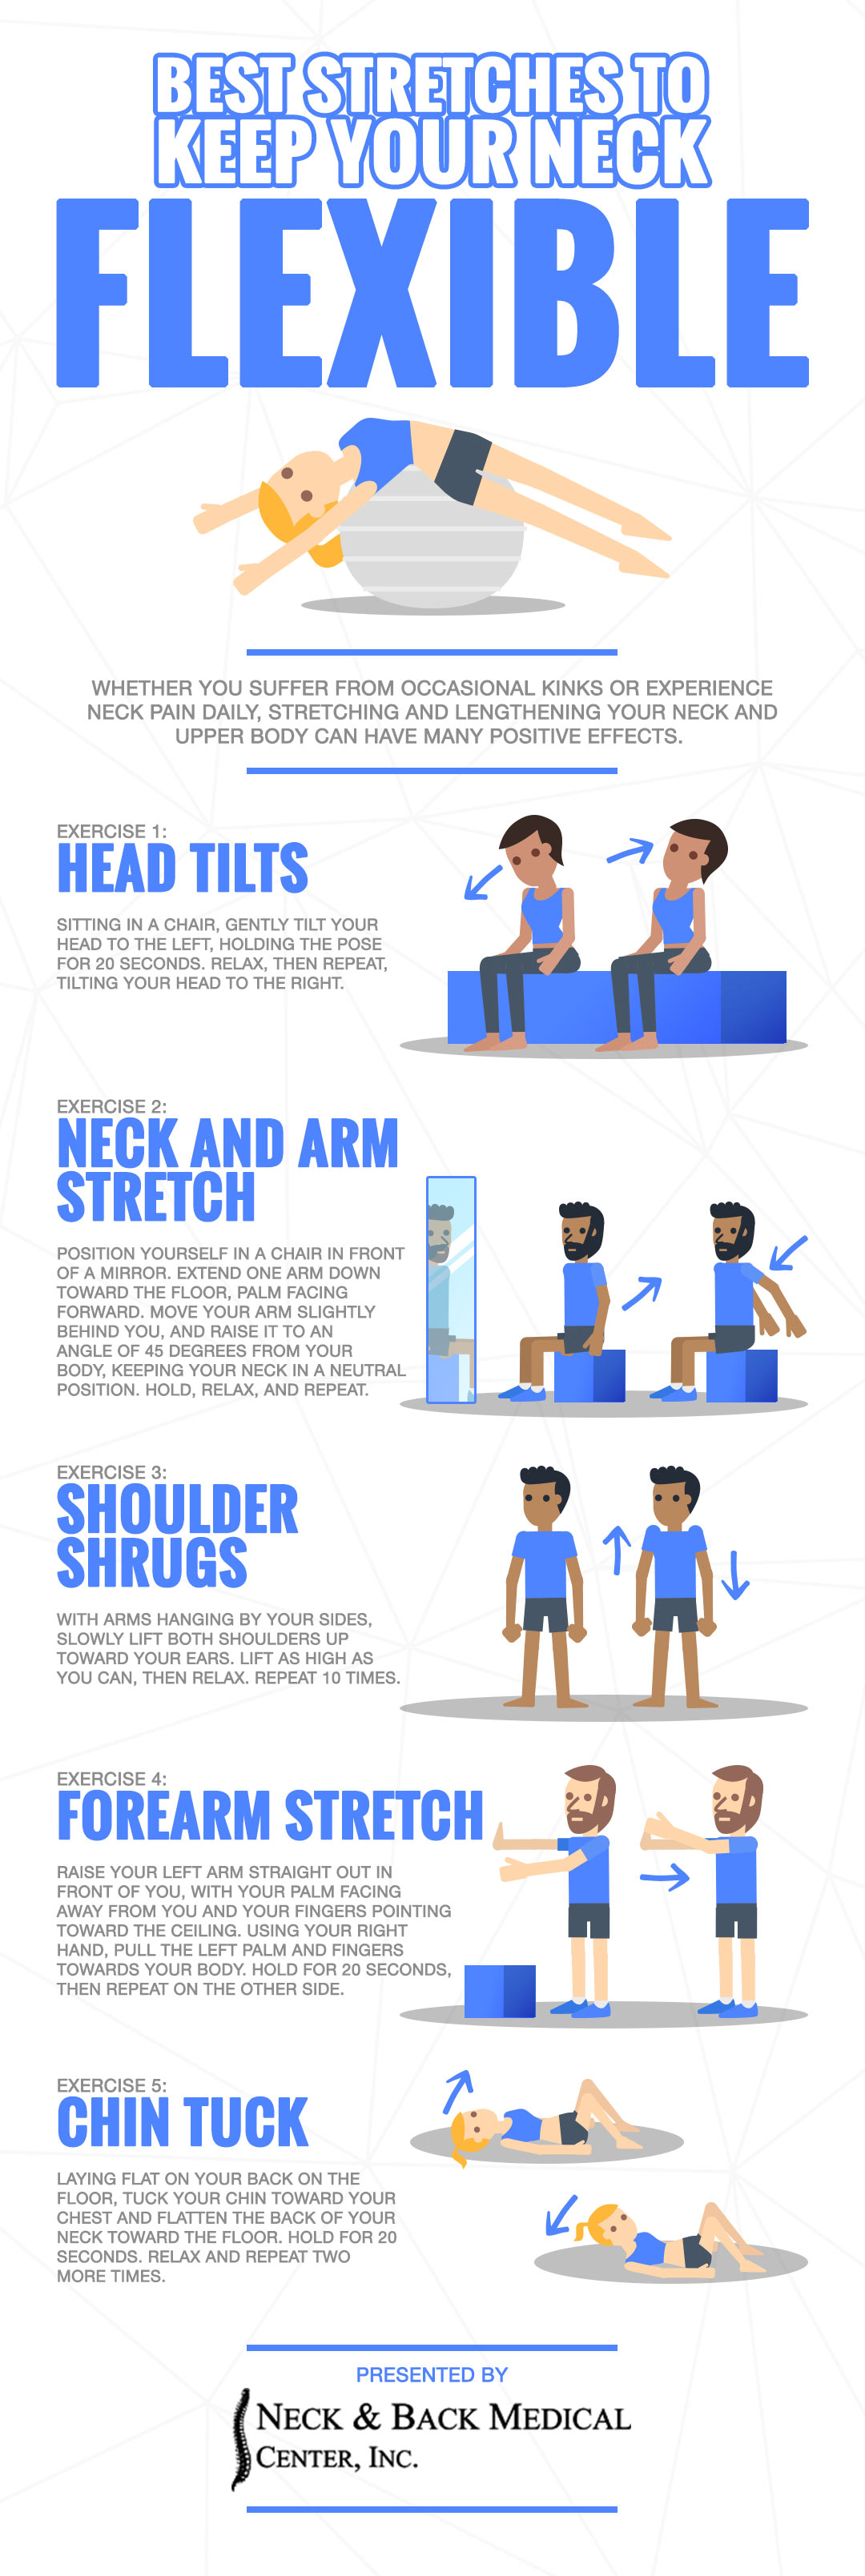 fix neck pain | neck stretches | neck and back medical center